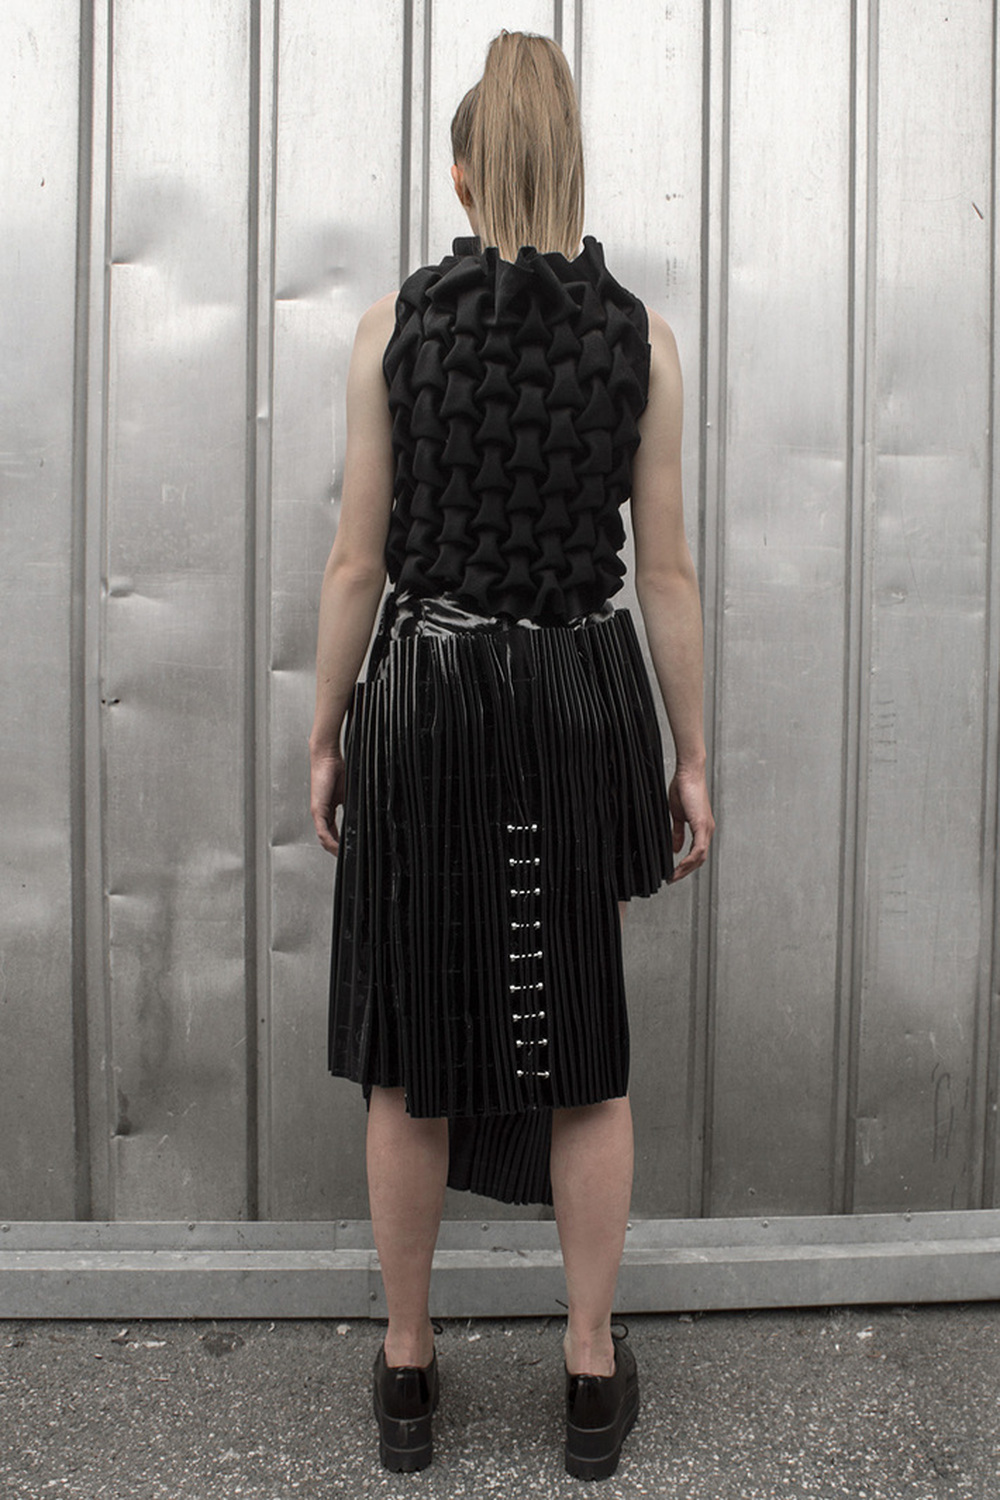 Look 6

Hand-smocked cashmere top with metal embellishments and a pleated, black vinyl skirt 